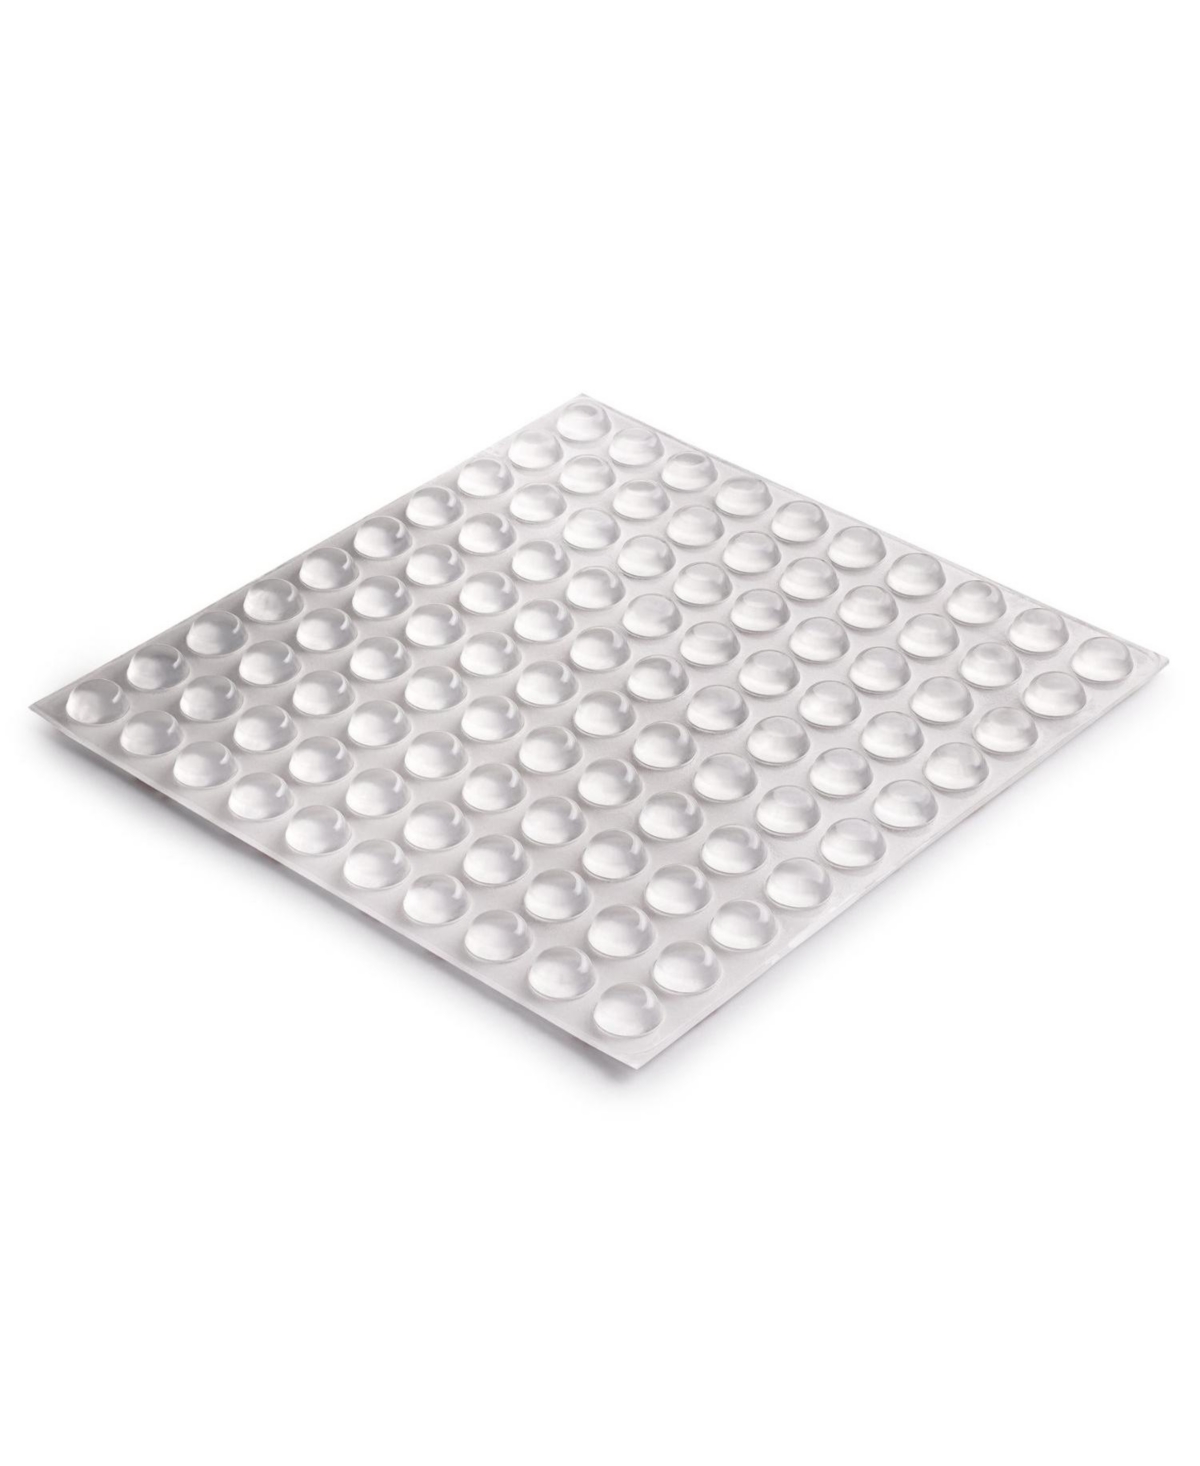 Cabinet Bumpers Clear Adhesive Pads 100-Pc.